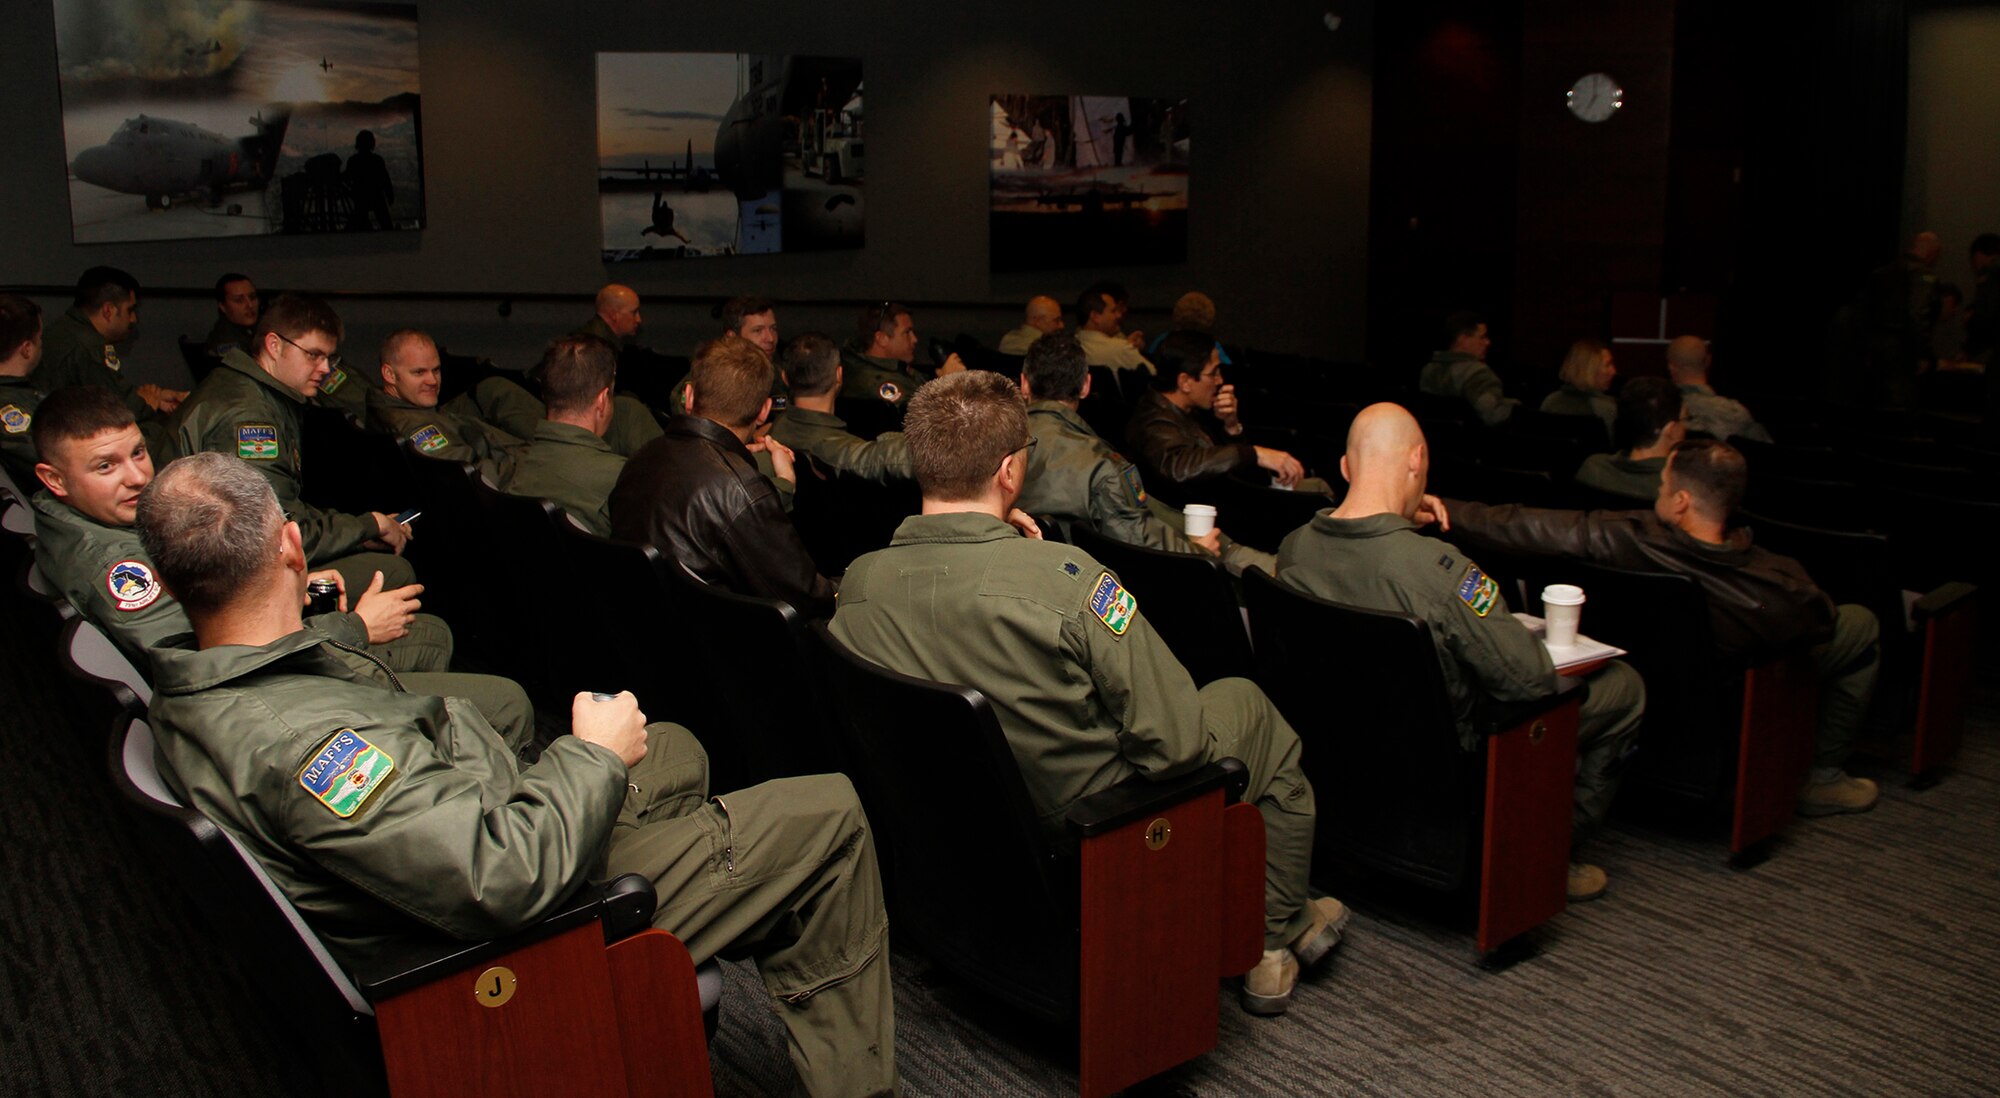 Aircrews of the 302nd Airlift Wing gather for a morning briefing during Modular Airborne Fire Fighting System training April 22. The Air Force Reserve Command’s 302nd AW held its annual MAFFS certification and re-certification for C-130 aircrews April 19-23. When it is determined MAFFS is needed, the National Interagency Fire Center through U.S. Northern Command requests the DOD's U.S. Air Force resources. These trained military personnel along with the MAFFS equipment are activated to supplement the civilian air tanker program during periods of high wildfire activity throughout the nation. In 2012 the 302nd AW MAFFS-equipped C-130s, aircrew and personnel supported fire suppression operations in 10 states, including drops on the Waldo Canyon fire near Colorado Springs. 2013 marks the 20th year the MAFFS mission has been flown by the Airmen and C-130s of the 302nd AW. (U.S. Air Force photo/Staff Sgt. Nathan Federico)